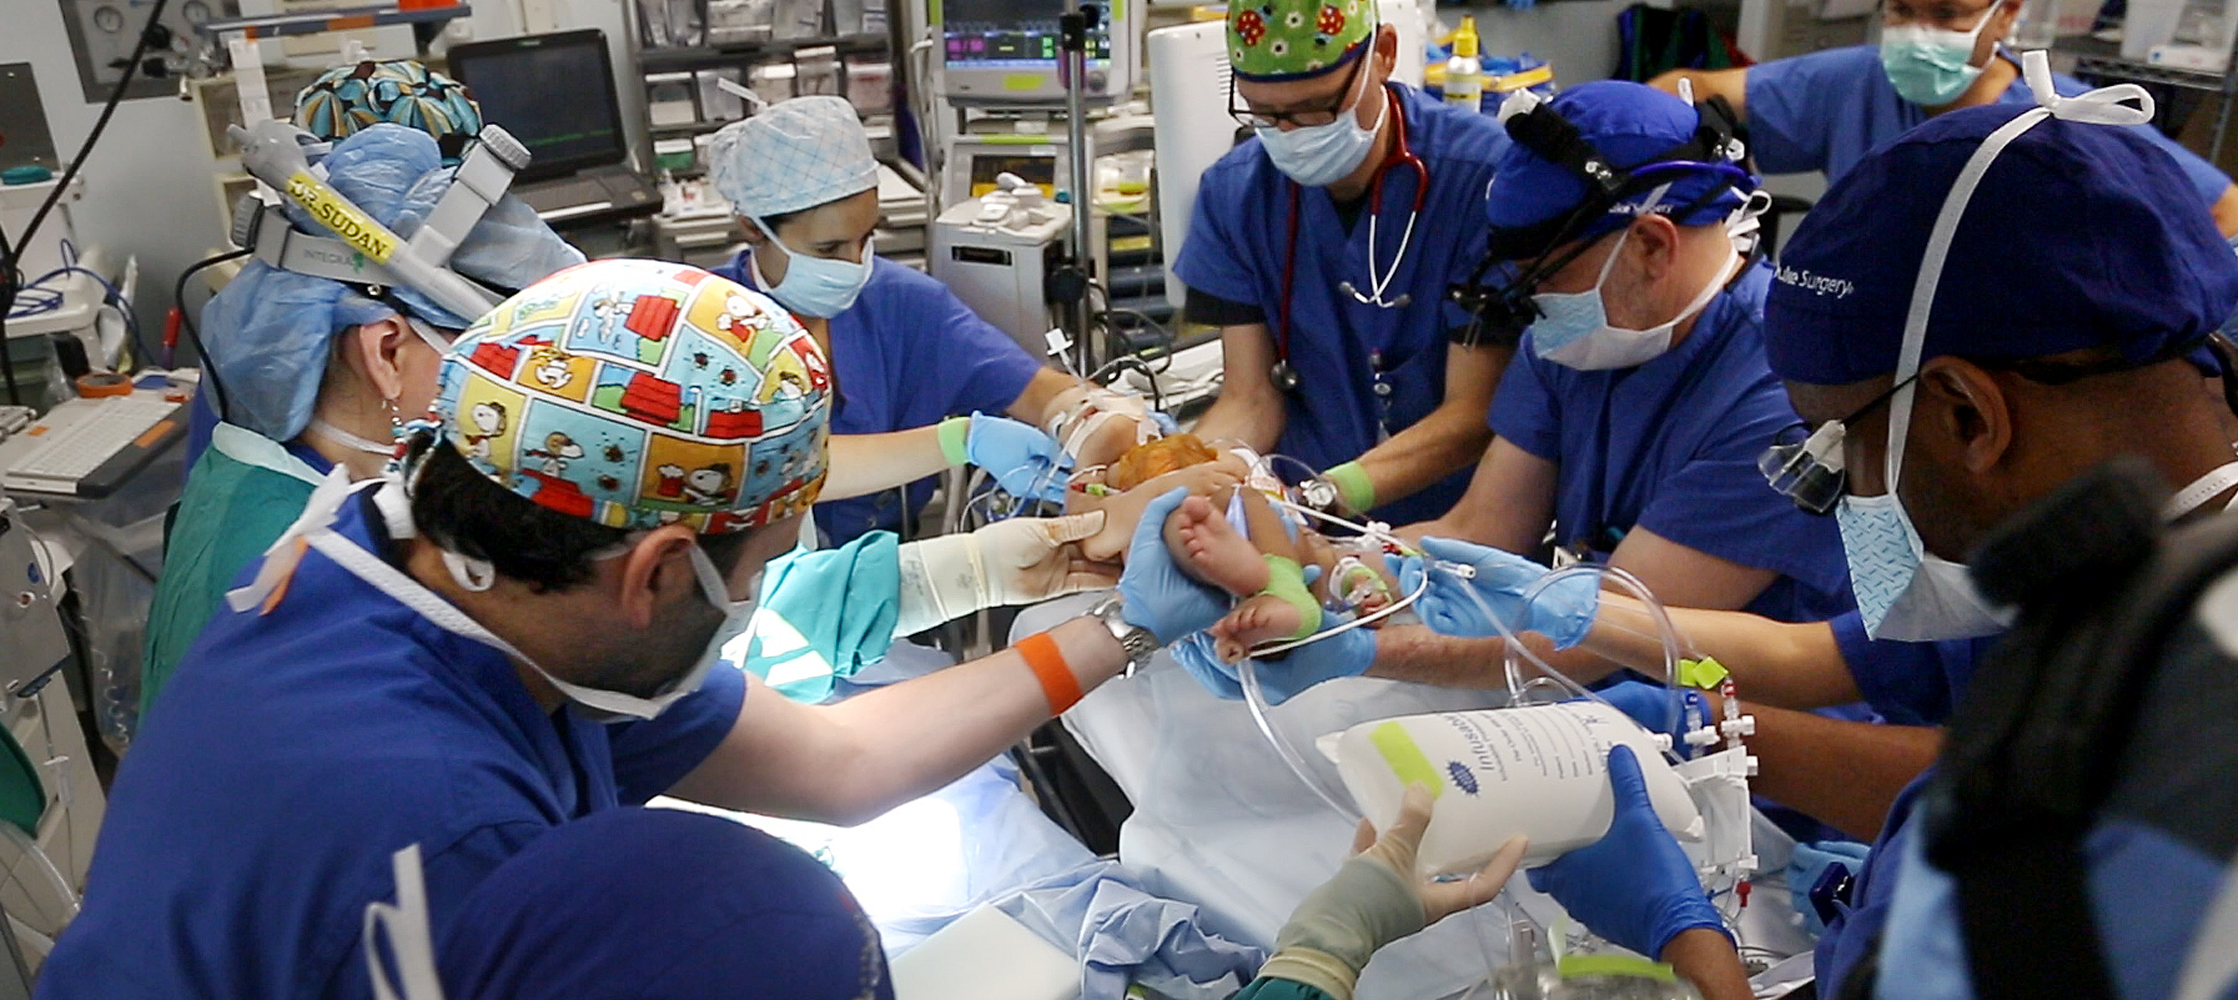 Duke surgeons and nurses lift and clean 8-month-old conjoined twins before surgery to separate them at Duke University Hospital in Durham on Thursday, June 18, 2015.